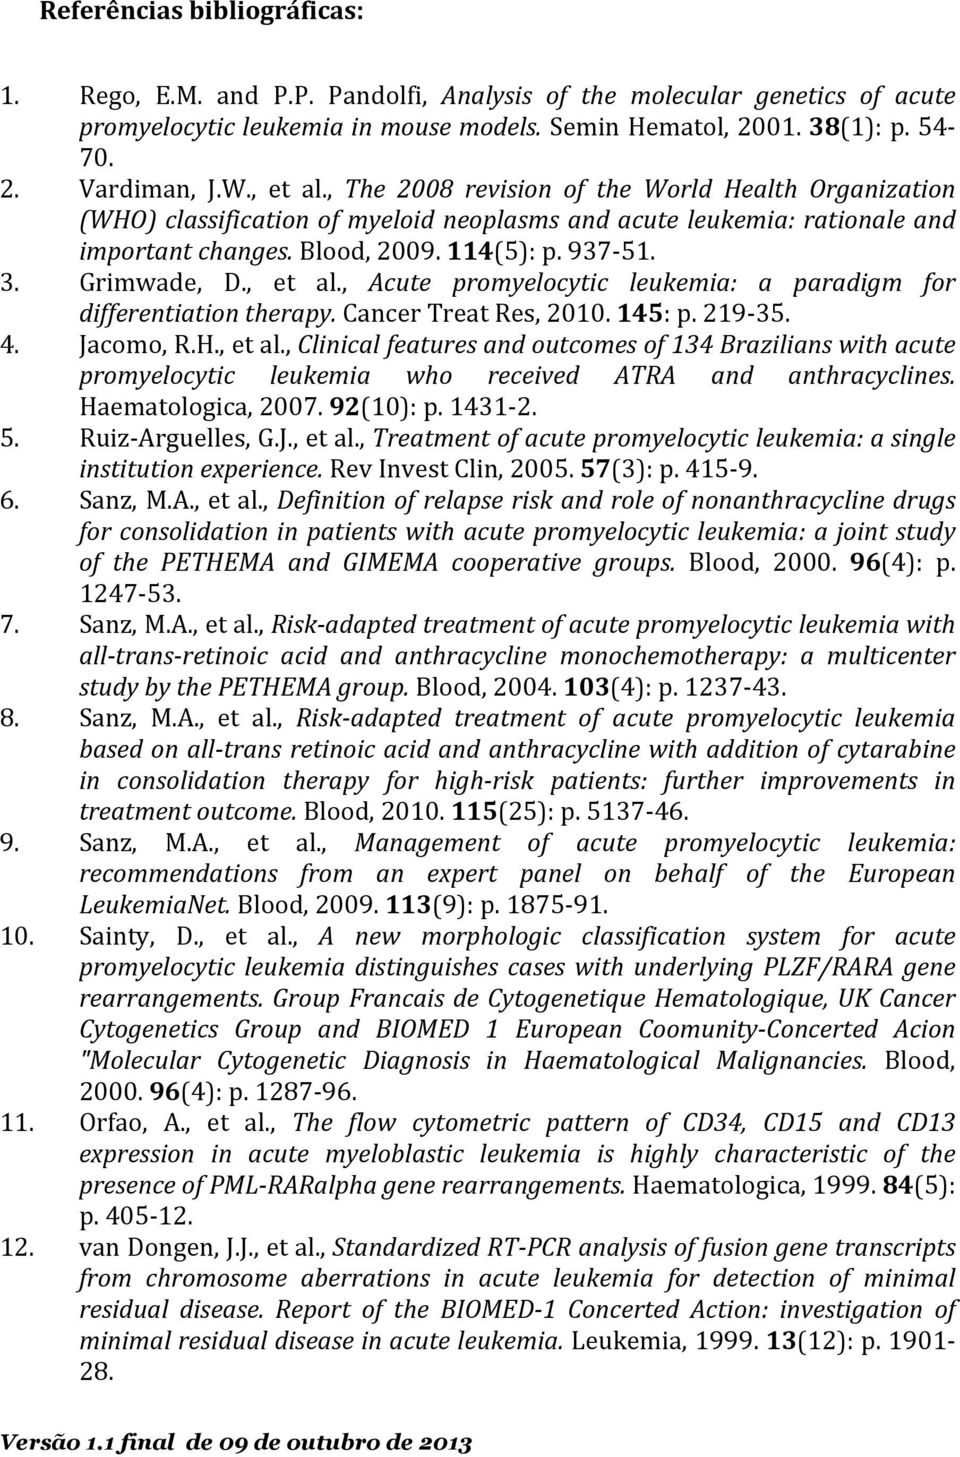 Grimwade, D., et al., Acute promyelocytic leukemia: a paradigm for differentiation therapy. Cancer Treat Res, 2010. 145: p. 219-35. 4. Jacomo, R.H., et al., Clinical features and outcomes of 134 Brazilians with acute promyelocytic leukemia who received ATRA and anthracyclines.